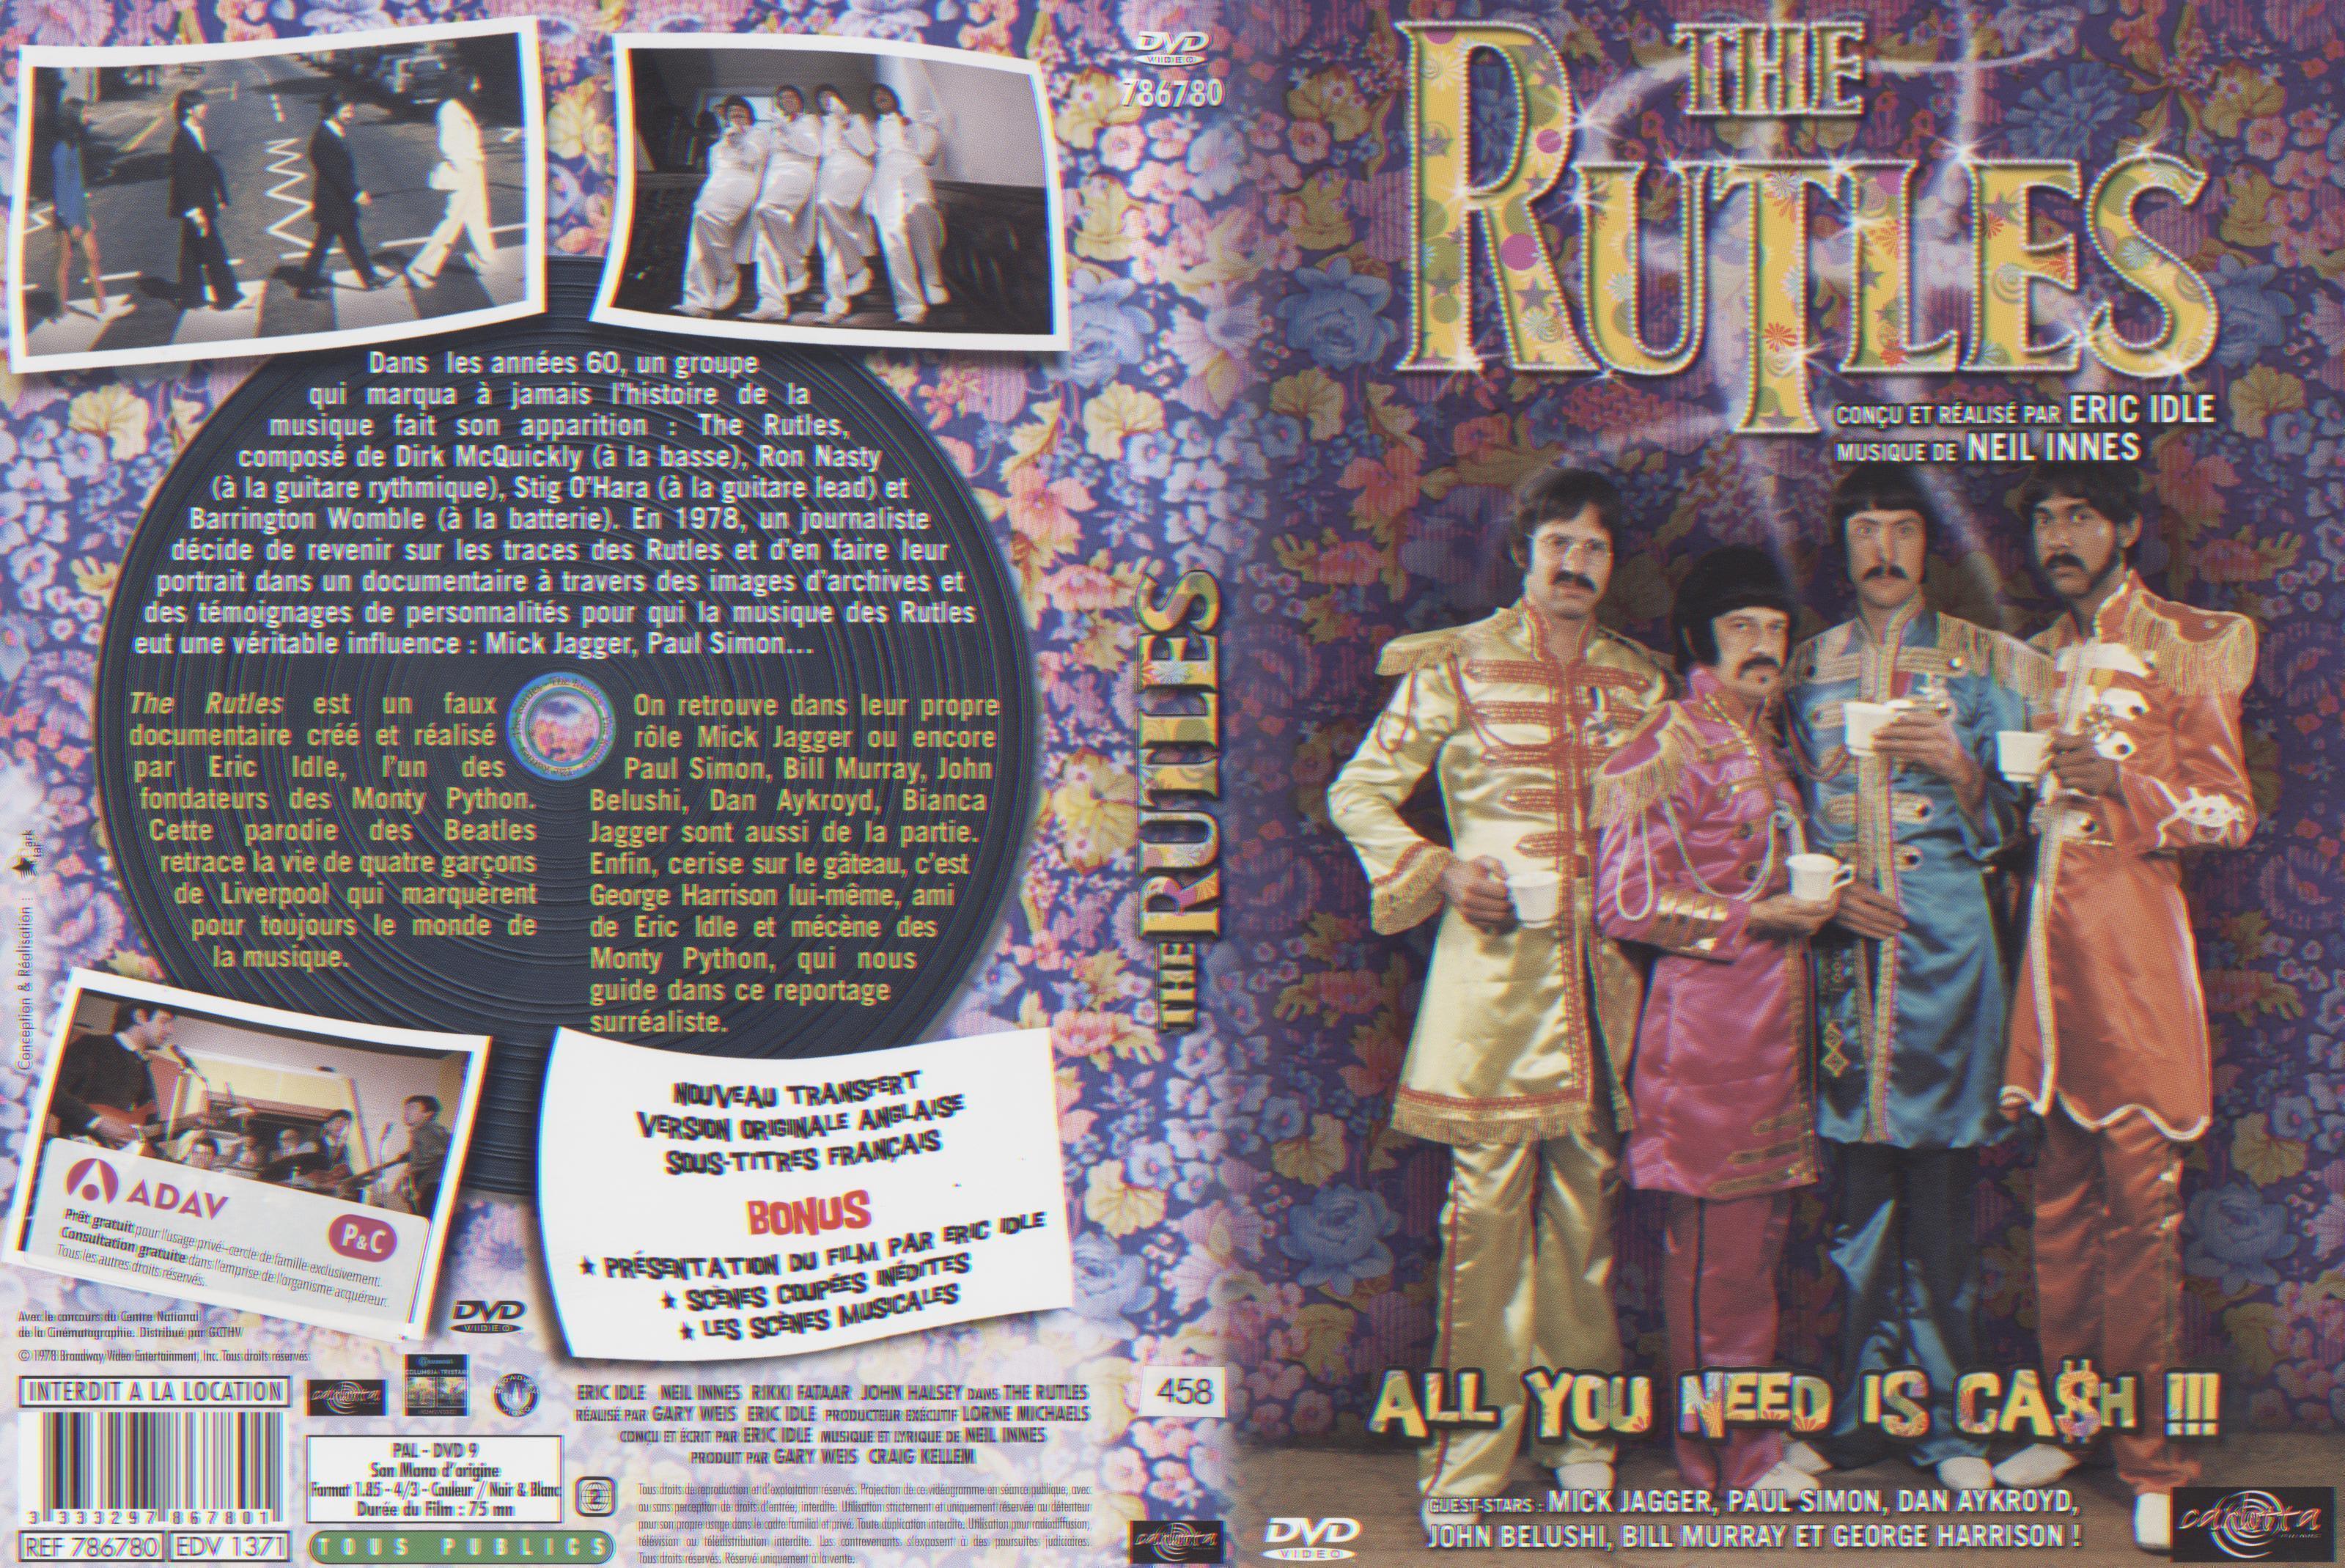 Monty Python - The Rutles - All You Need Is Cash